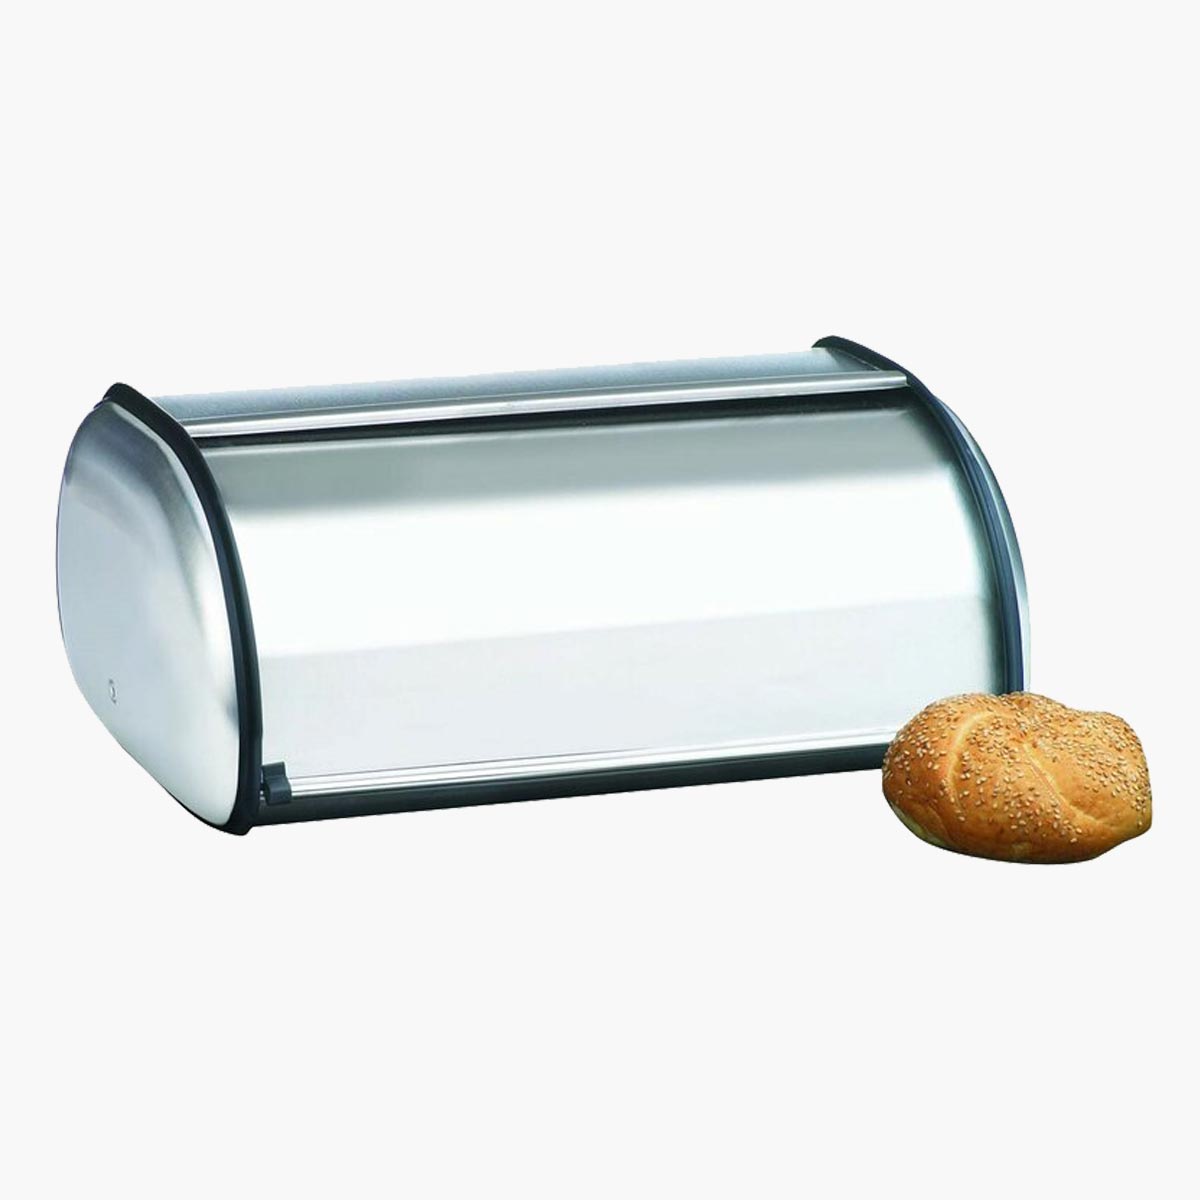 A metal Anchor Hocking bread box with a bun in front of it.